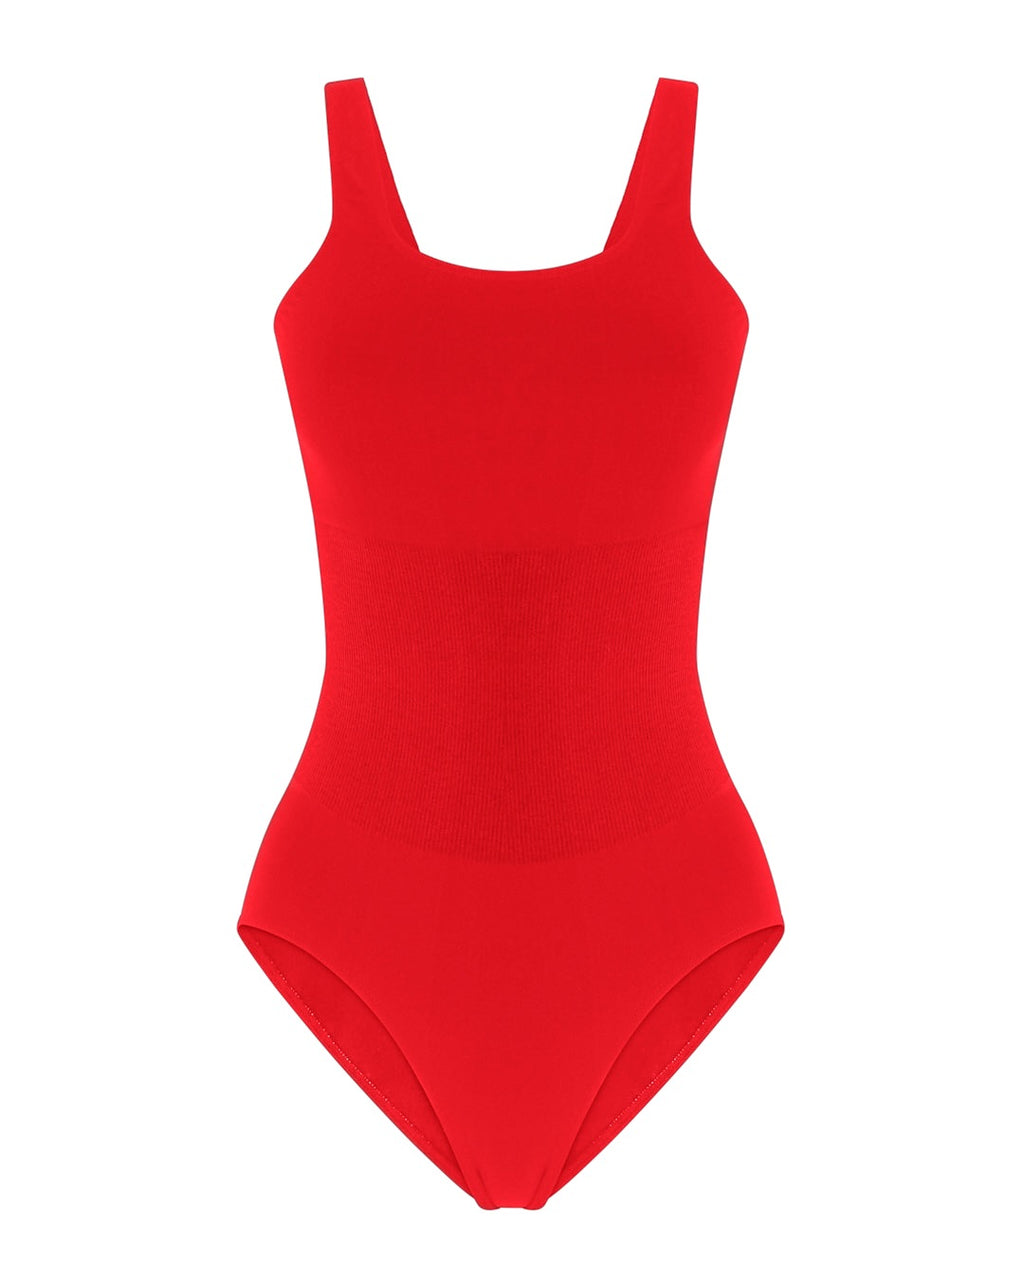 AMOROUS Bright Red One-Piece, Flattering Square Neck & Tummy Control, Ribbed Contouring for Plus Size